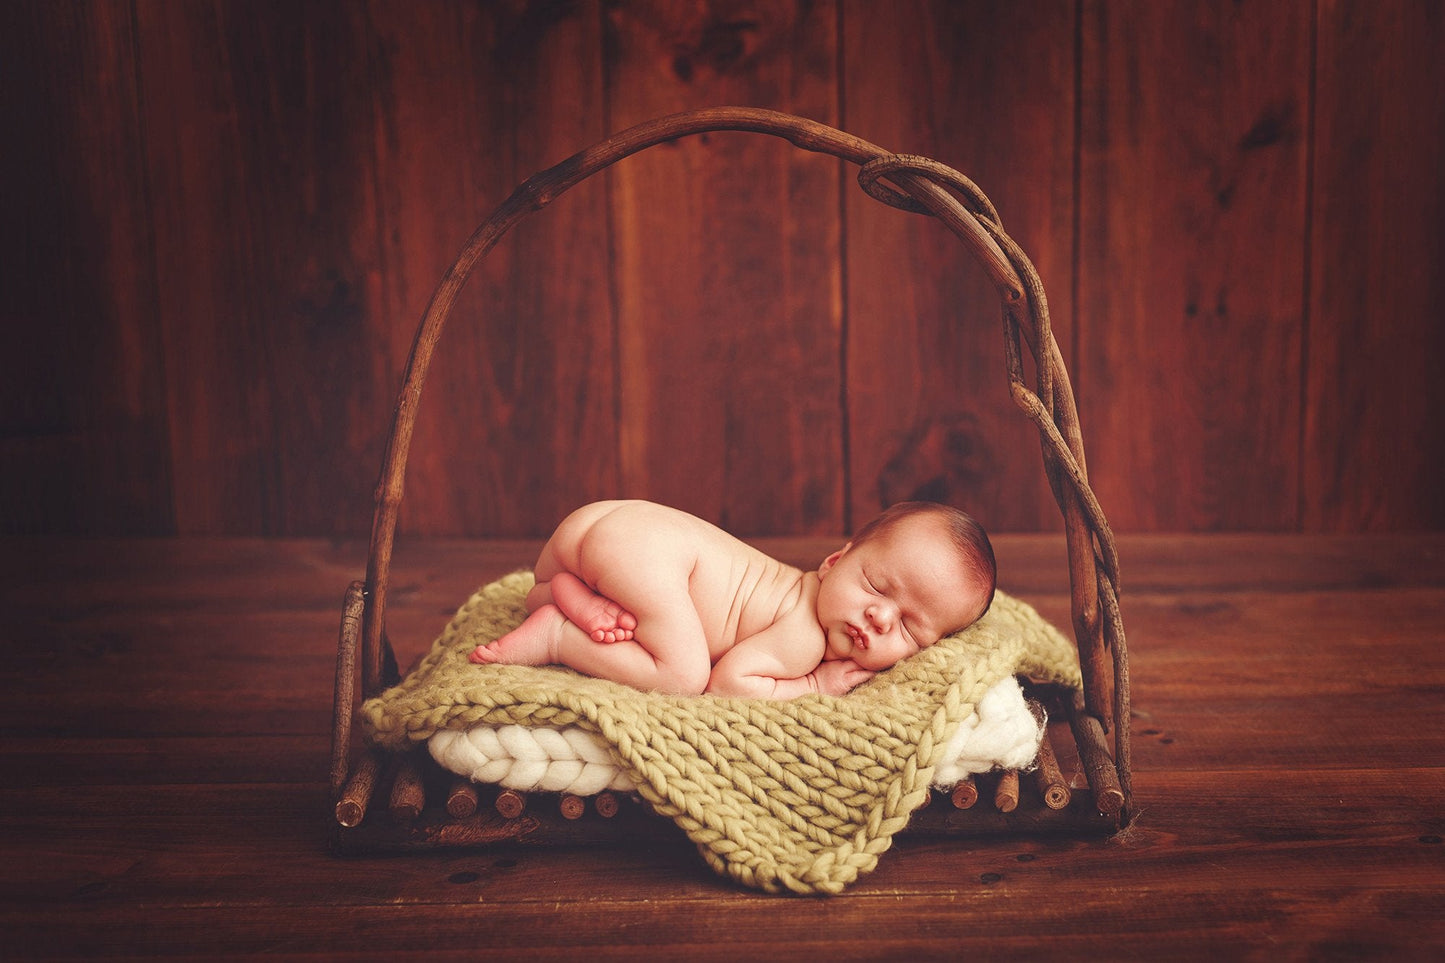 Rustic Bed with Arch (As-Is Item) #01-Newborn Photography Props